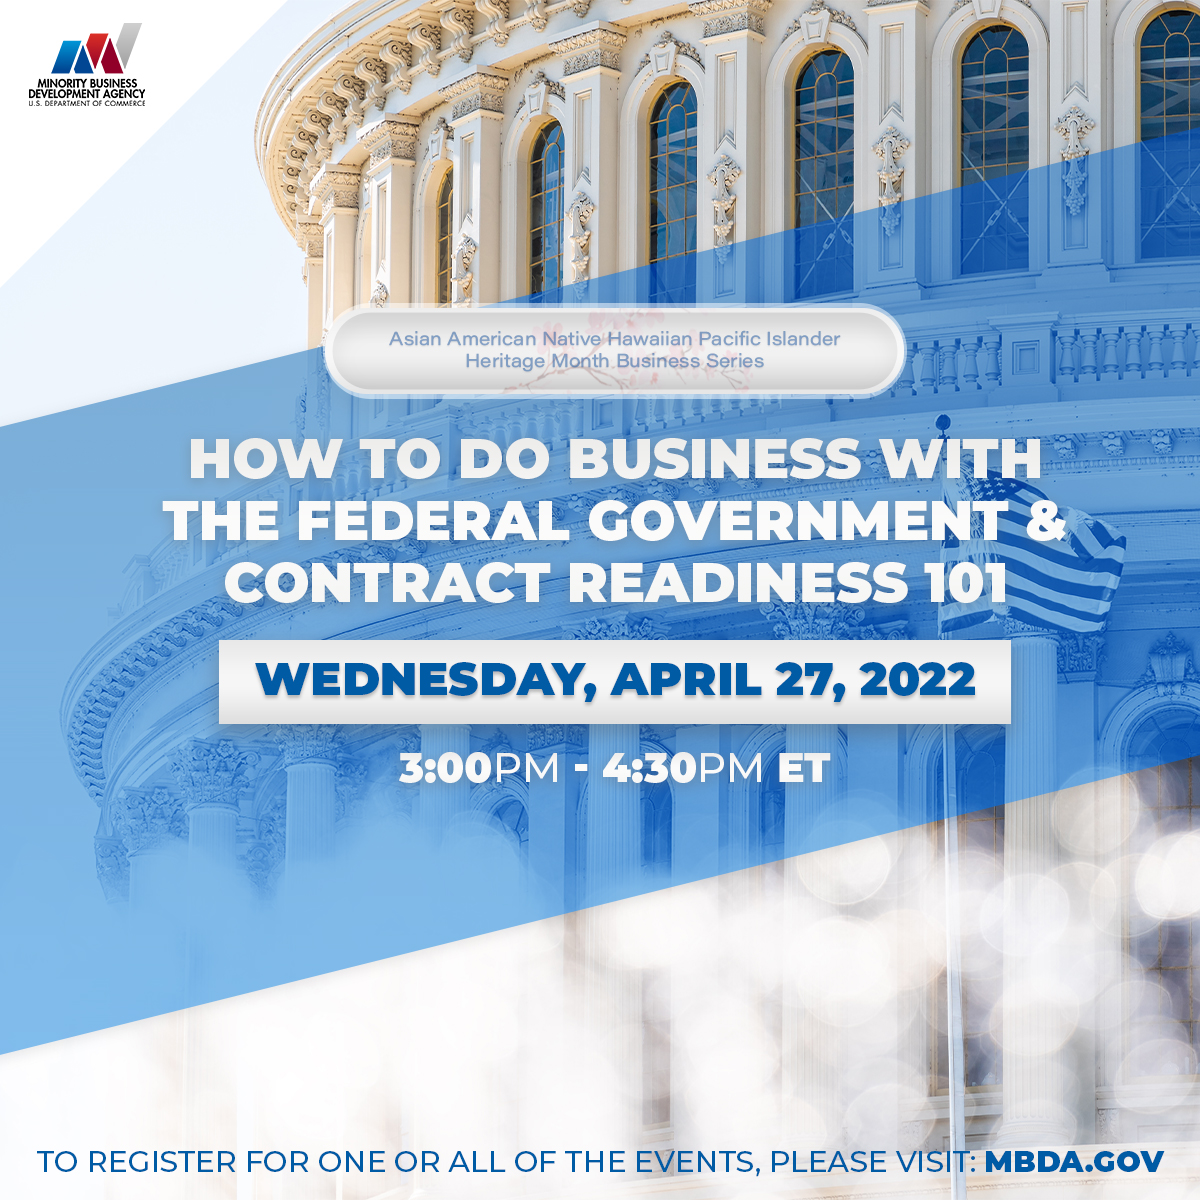 How to Do Business with the Federal Government & Contract Readiness 101